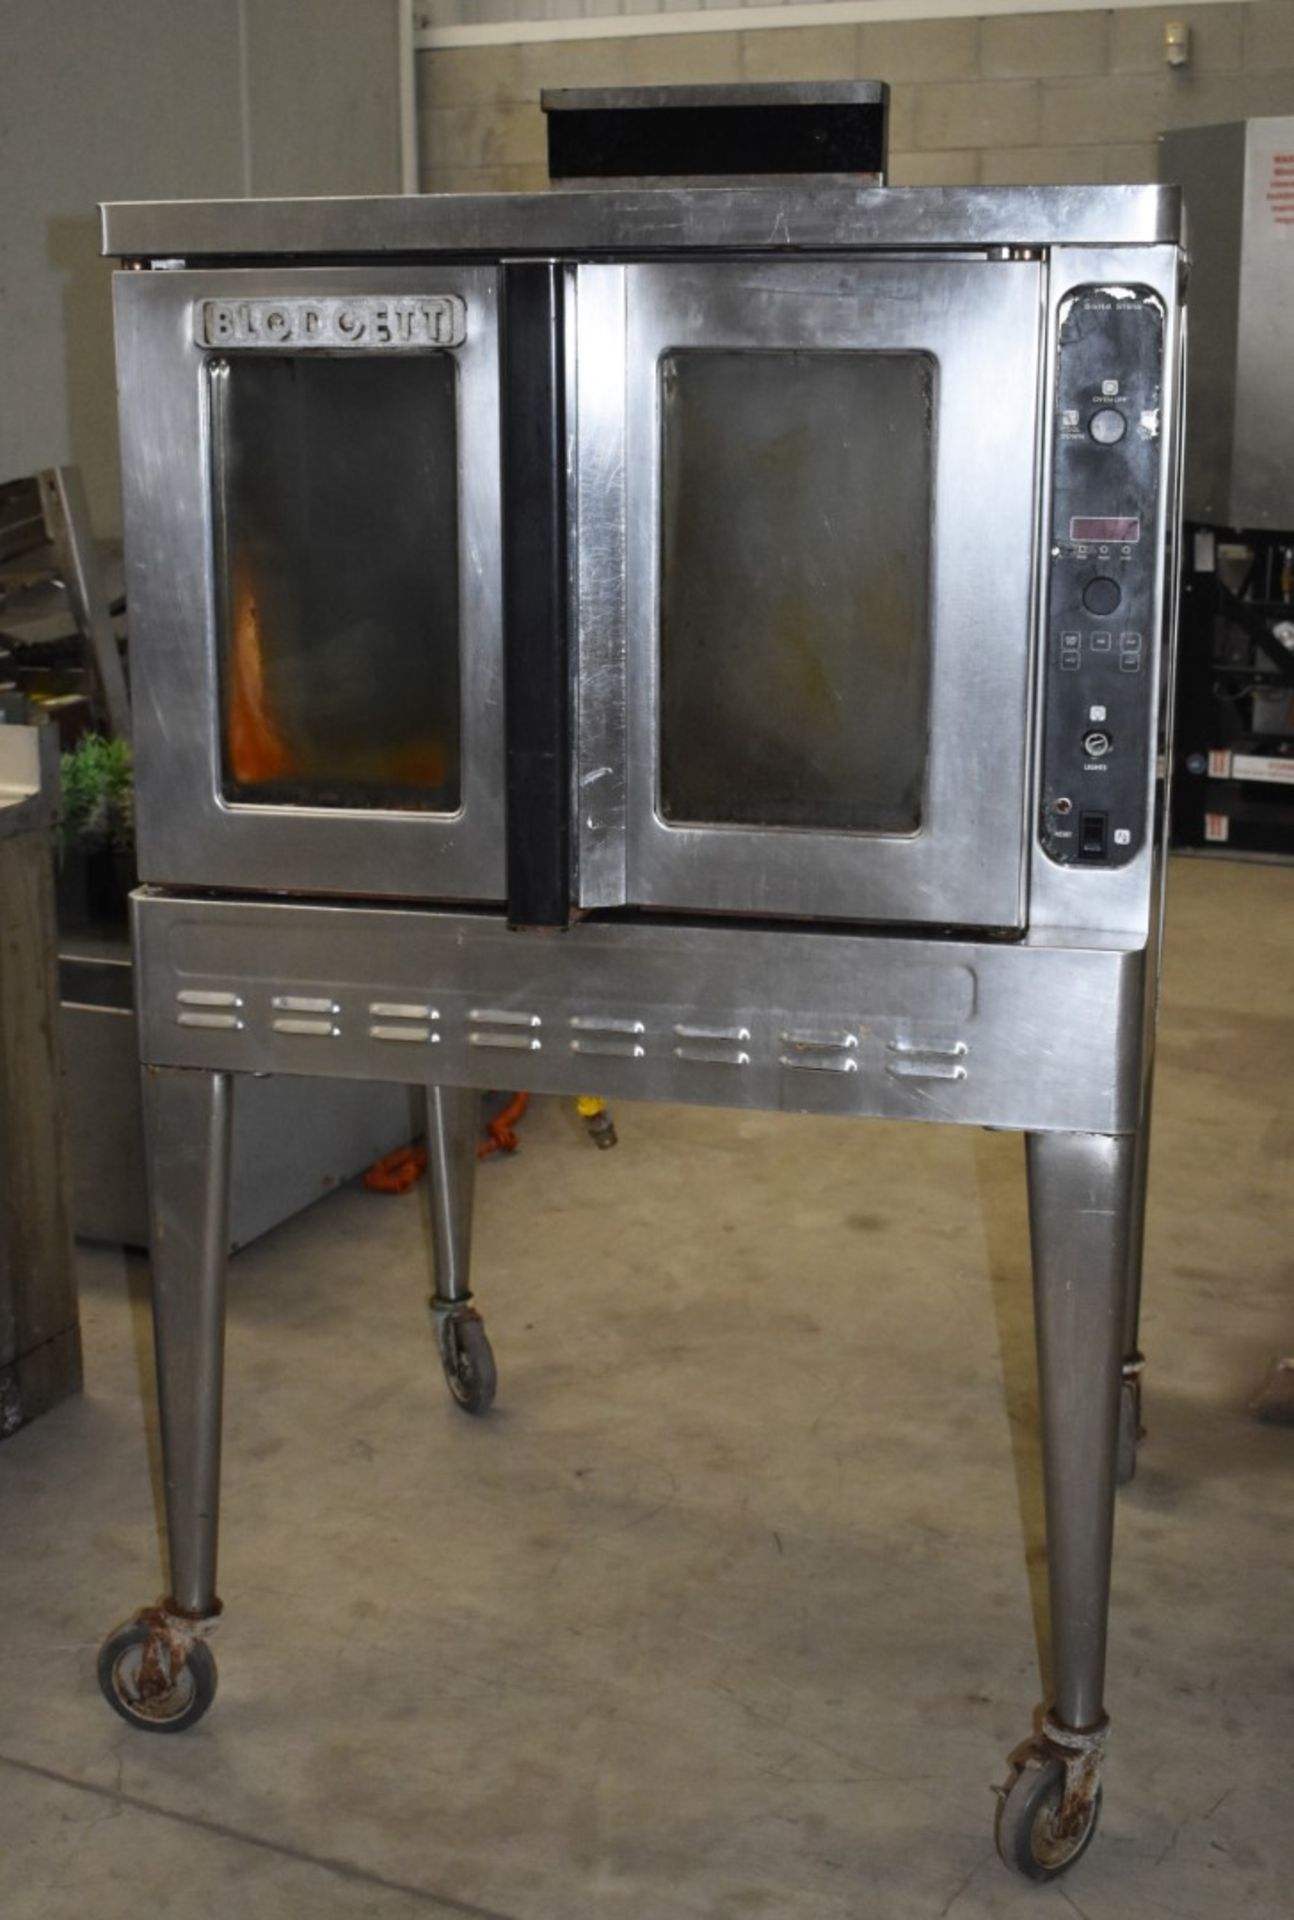 1 x Blodgett Solid State Gas Oven With Stainless Steel Exterior - CL232 - Location: Altrincham WA14 - Image 5 of 5